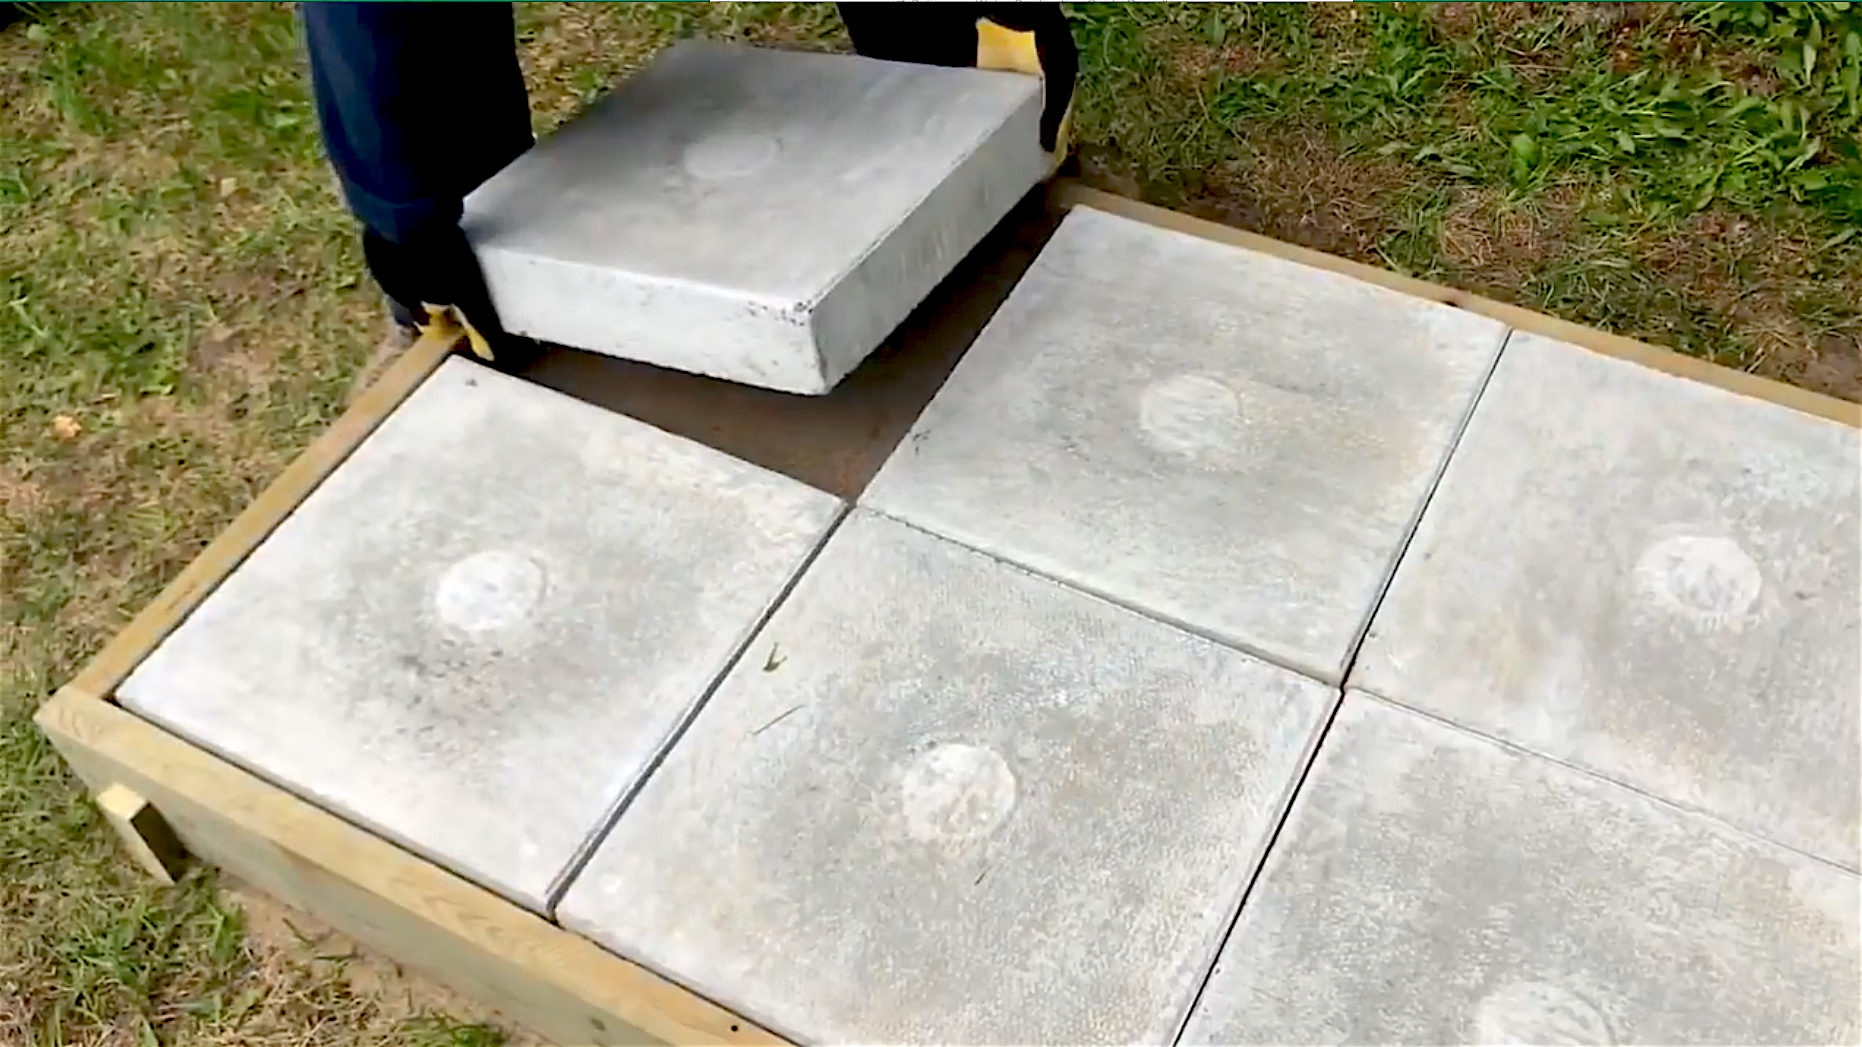 CONCRETE FOUNDATION PAD: Build One Without Pouring 